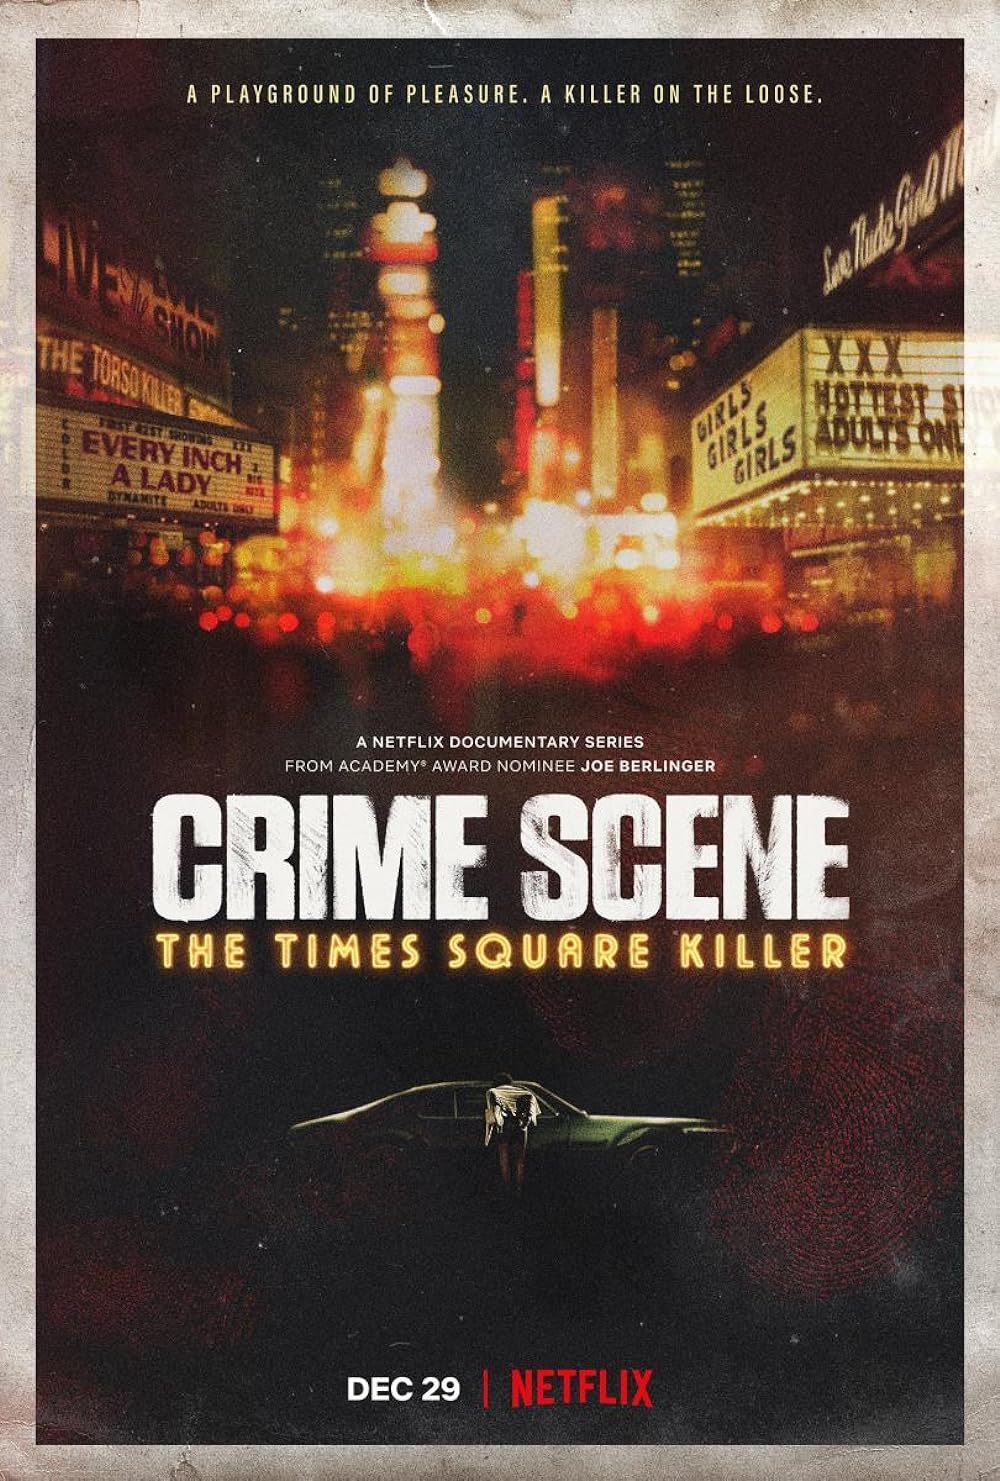 Crime Scene: The Times Square Killer (2021) S1 EP2 The Perfect Hunting Ground 640Kbps 23.976Fps 48Khz 5.1Ch DD+ NF E-AC3 Turkish Audio TAC